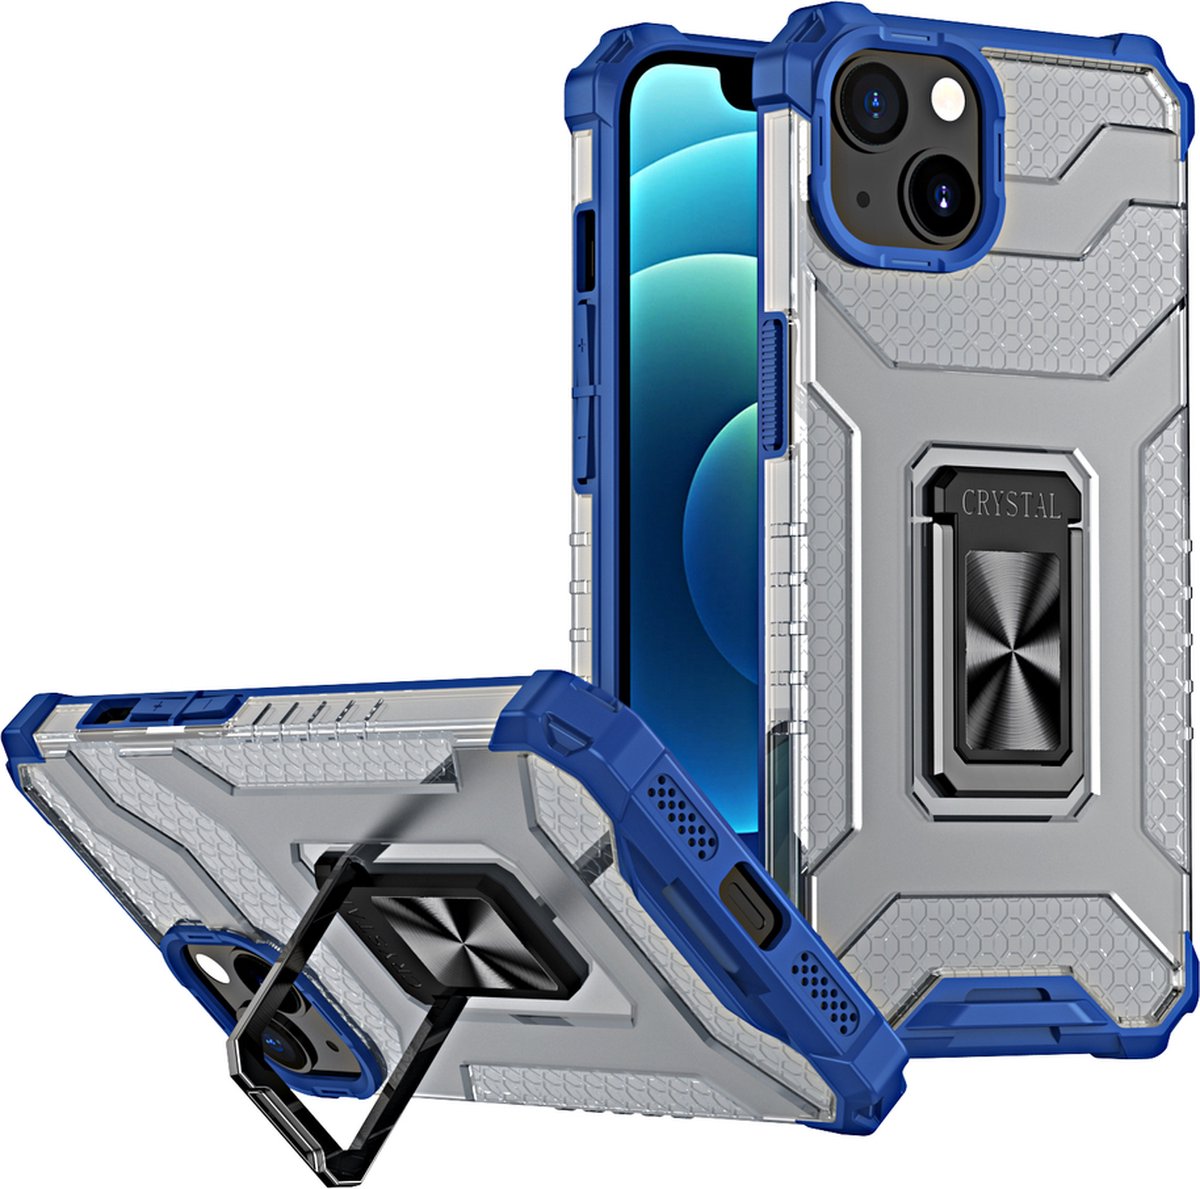 Crystal Ring Case Kickstand Tough Rugged Cover geschikt voor iPhone 13 mini blauw